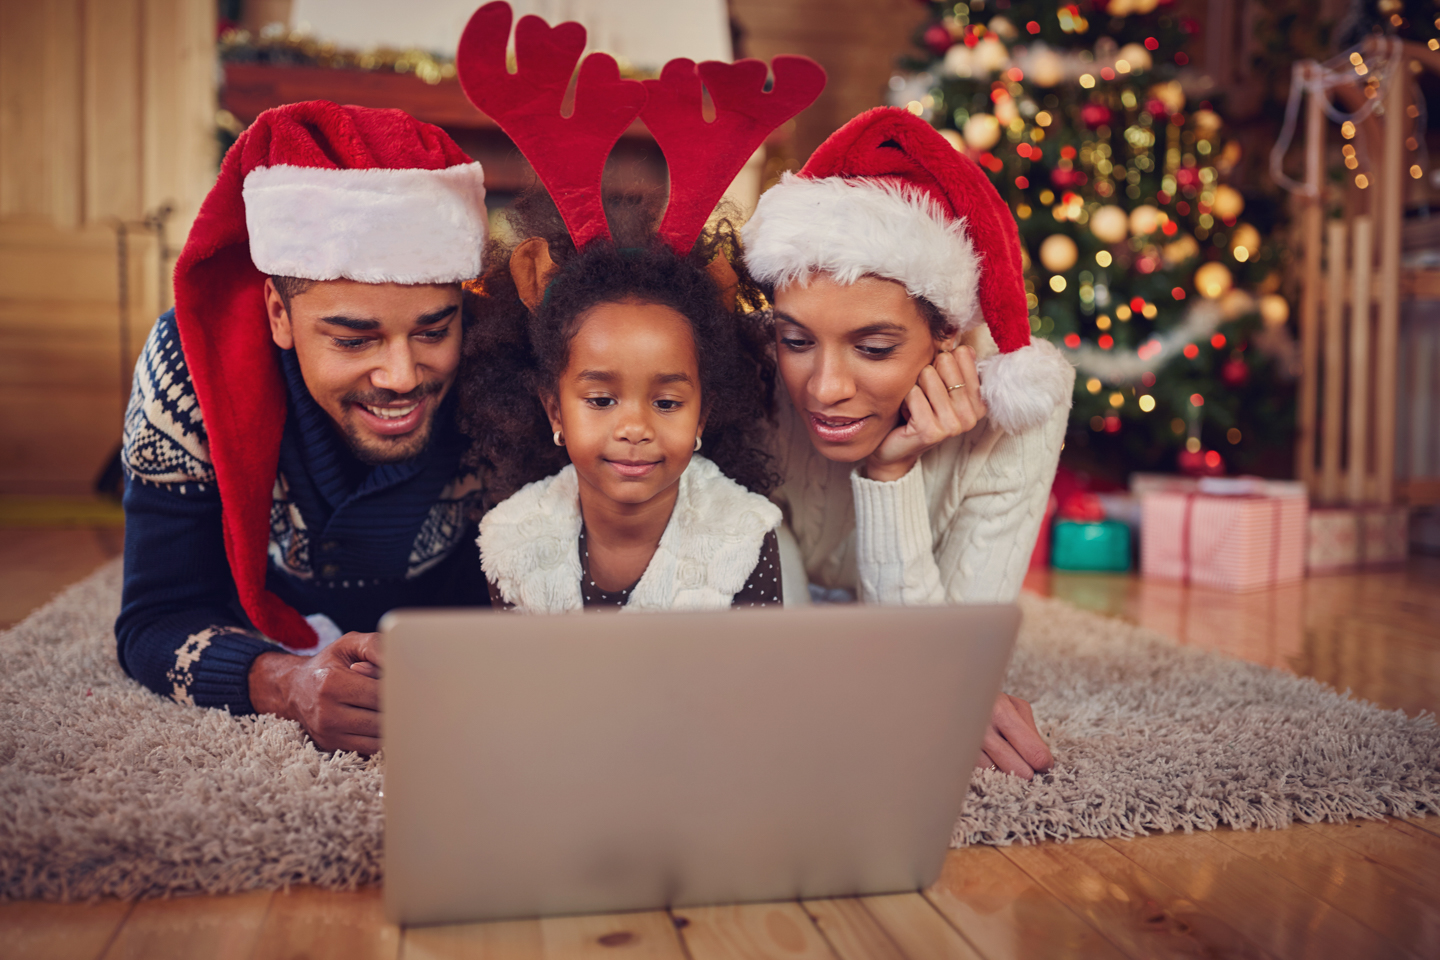 8 Christmas Movies to Watch with the Family